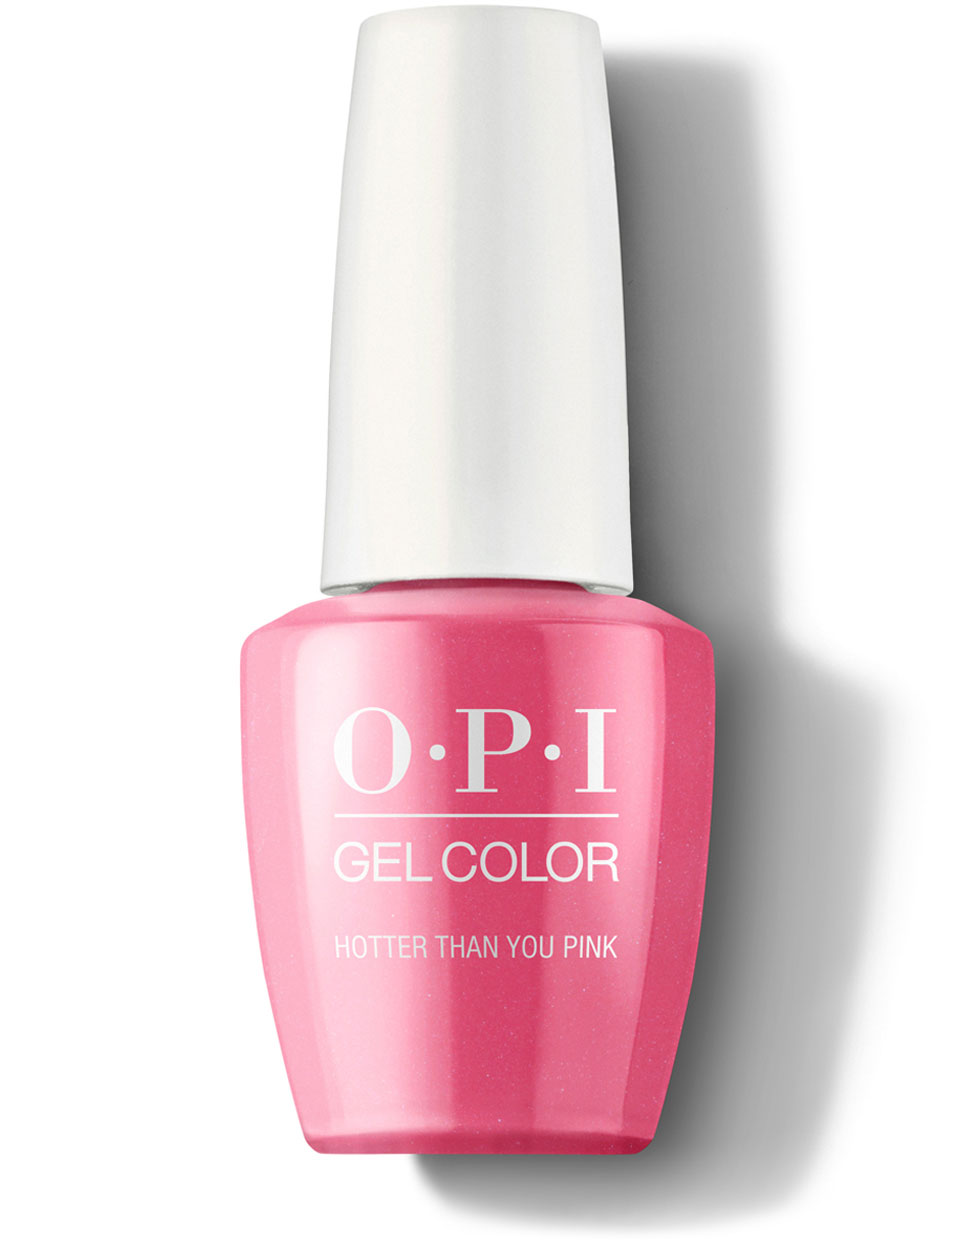 Hotter than You Pink - GelColor | OPI